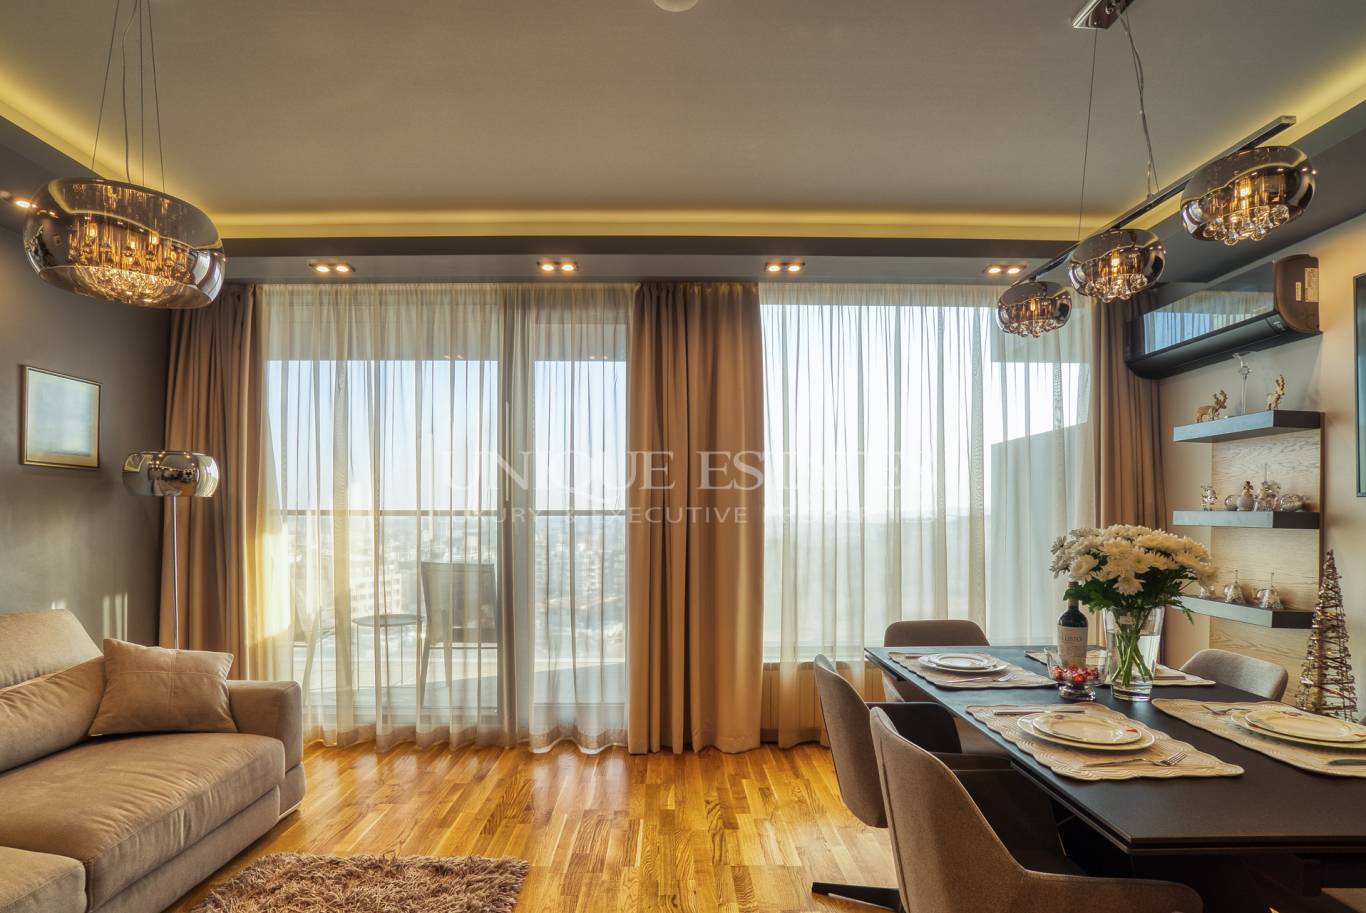 Apartment for sale in Sofia, Bulgaria Blvd with listing ID: E12623 - image 10